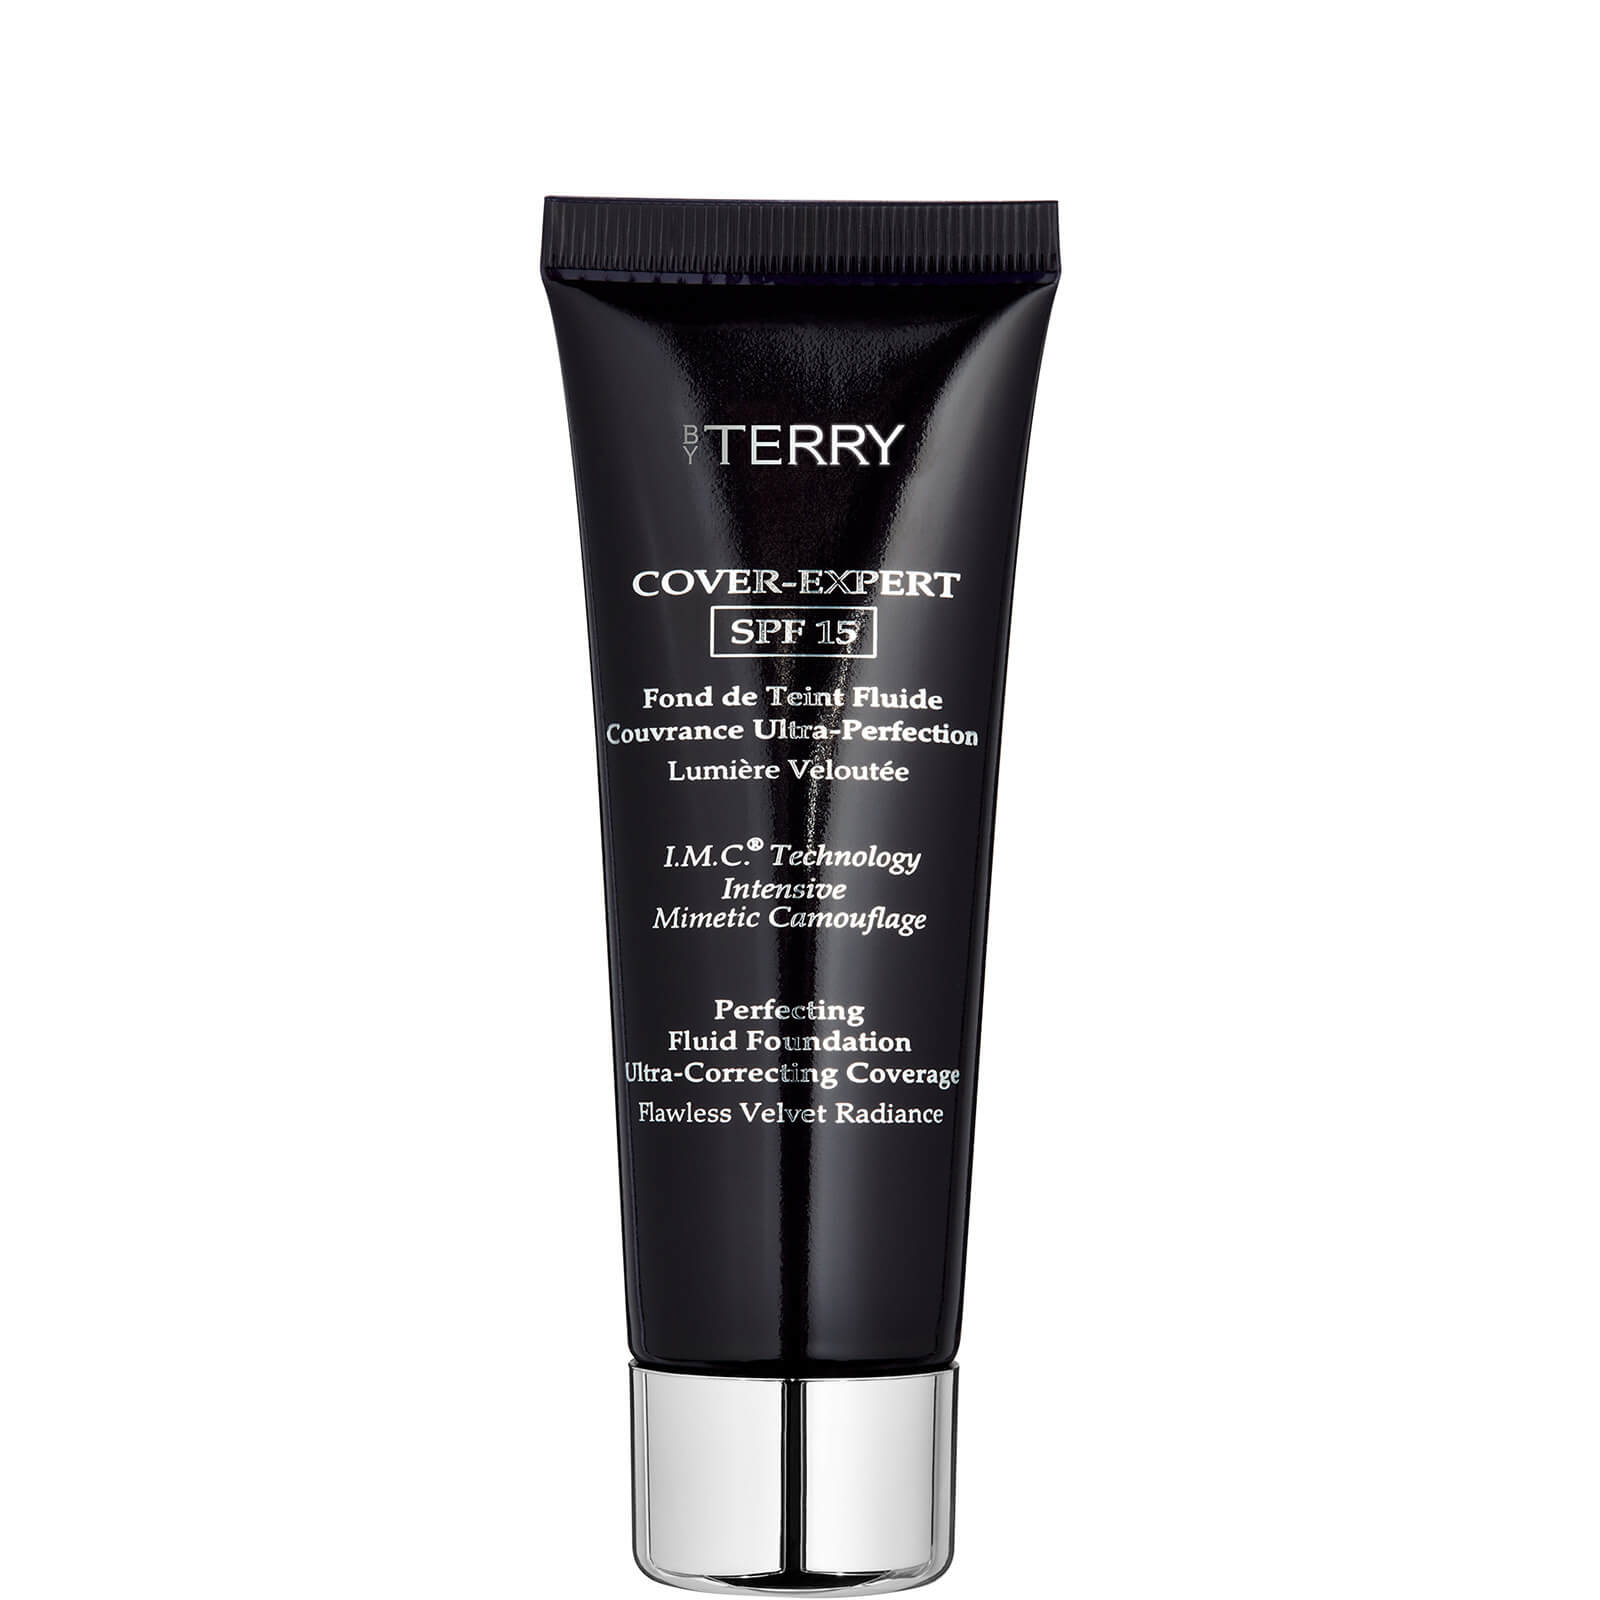 By Terry Cover-Expert Foundation SPF15 35ml (Various Shades) - 2. Neutral Beige